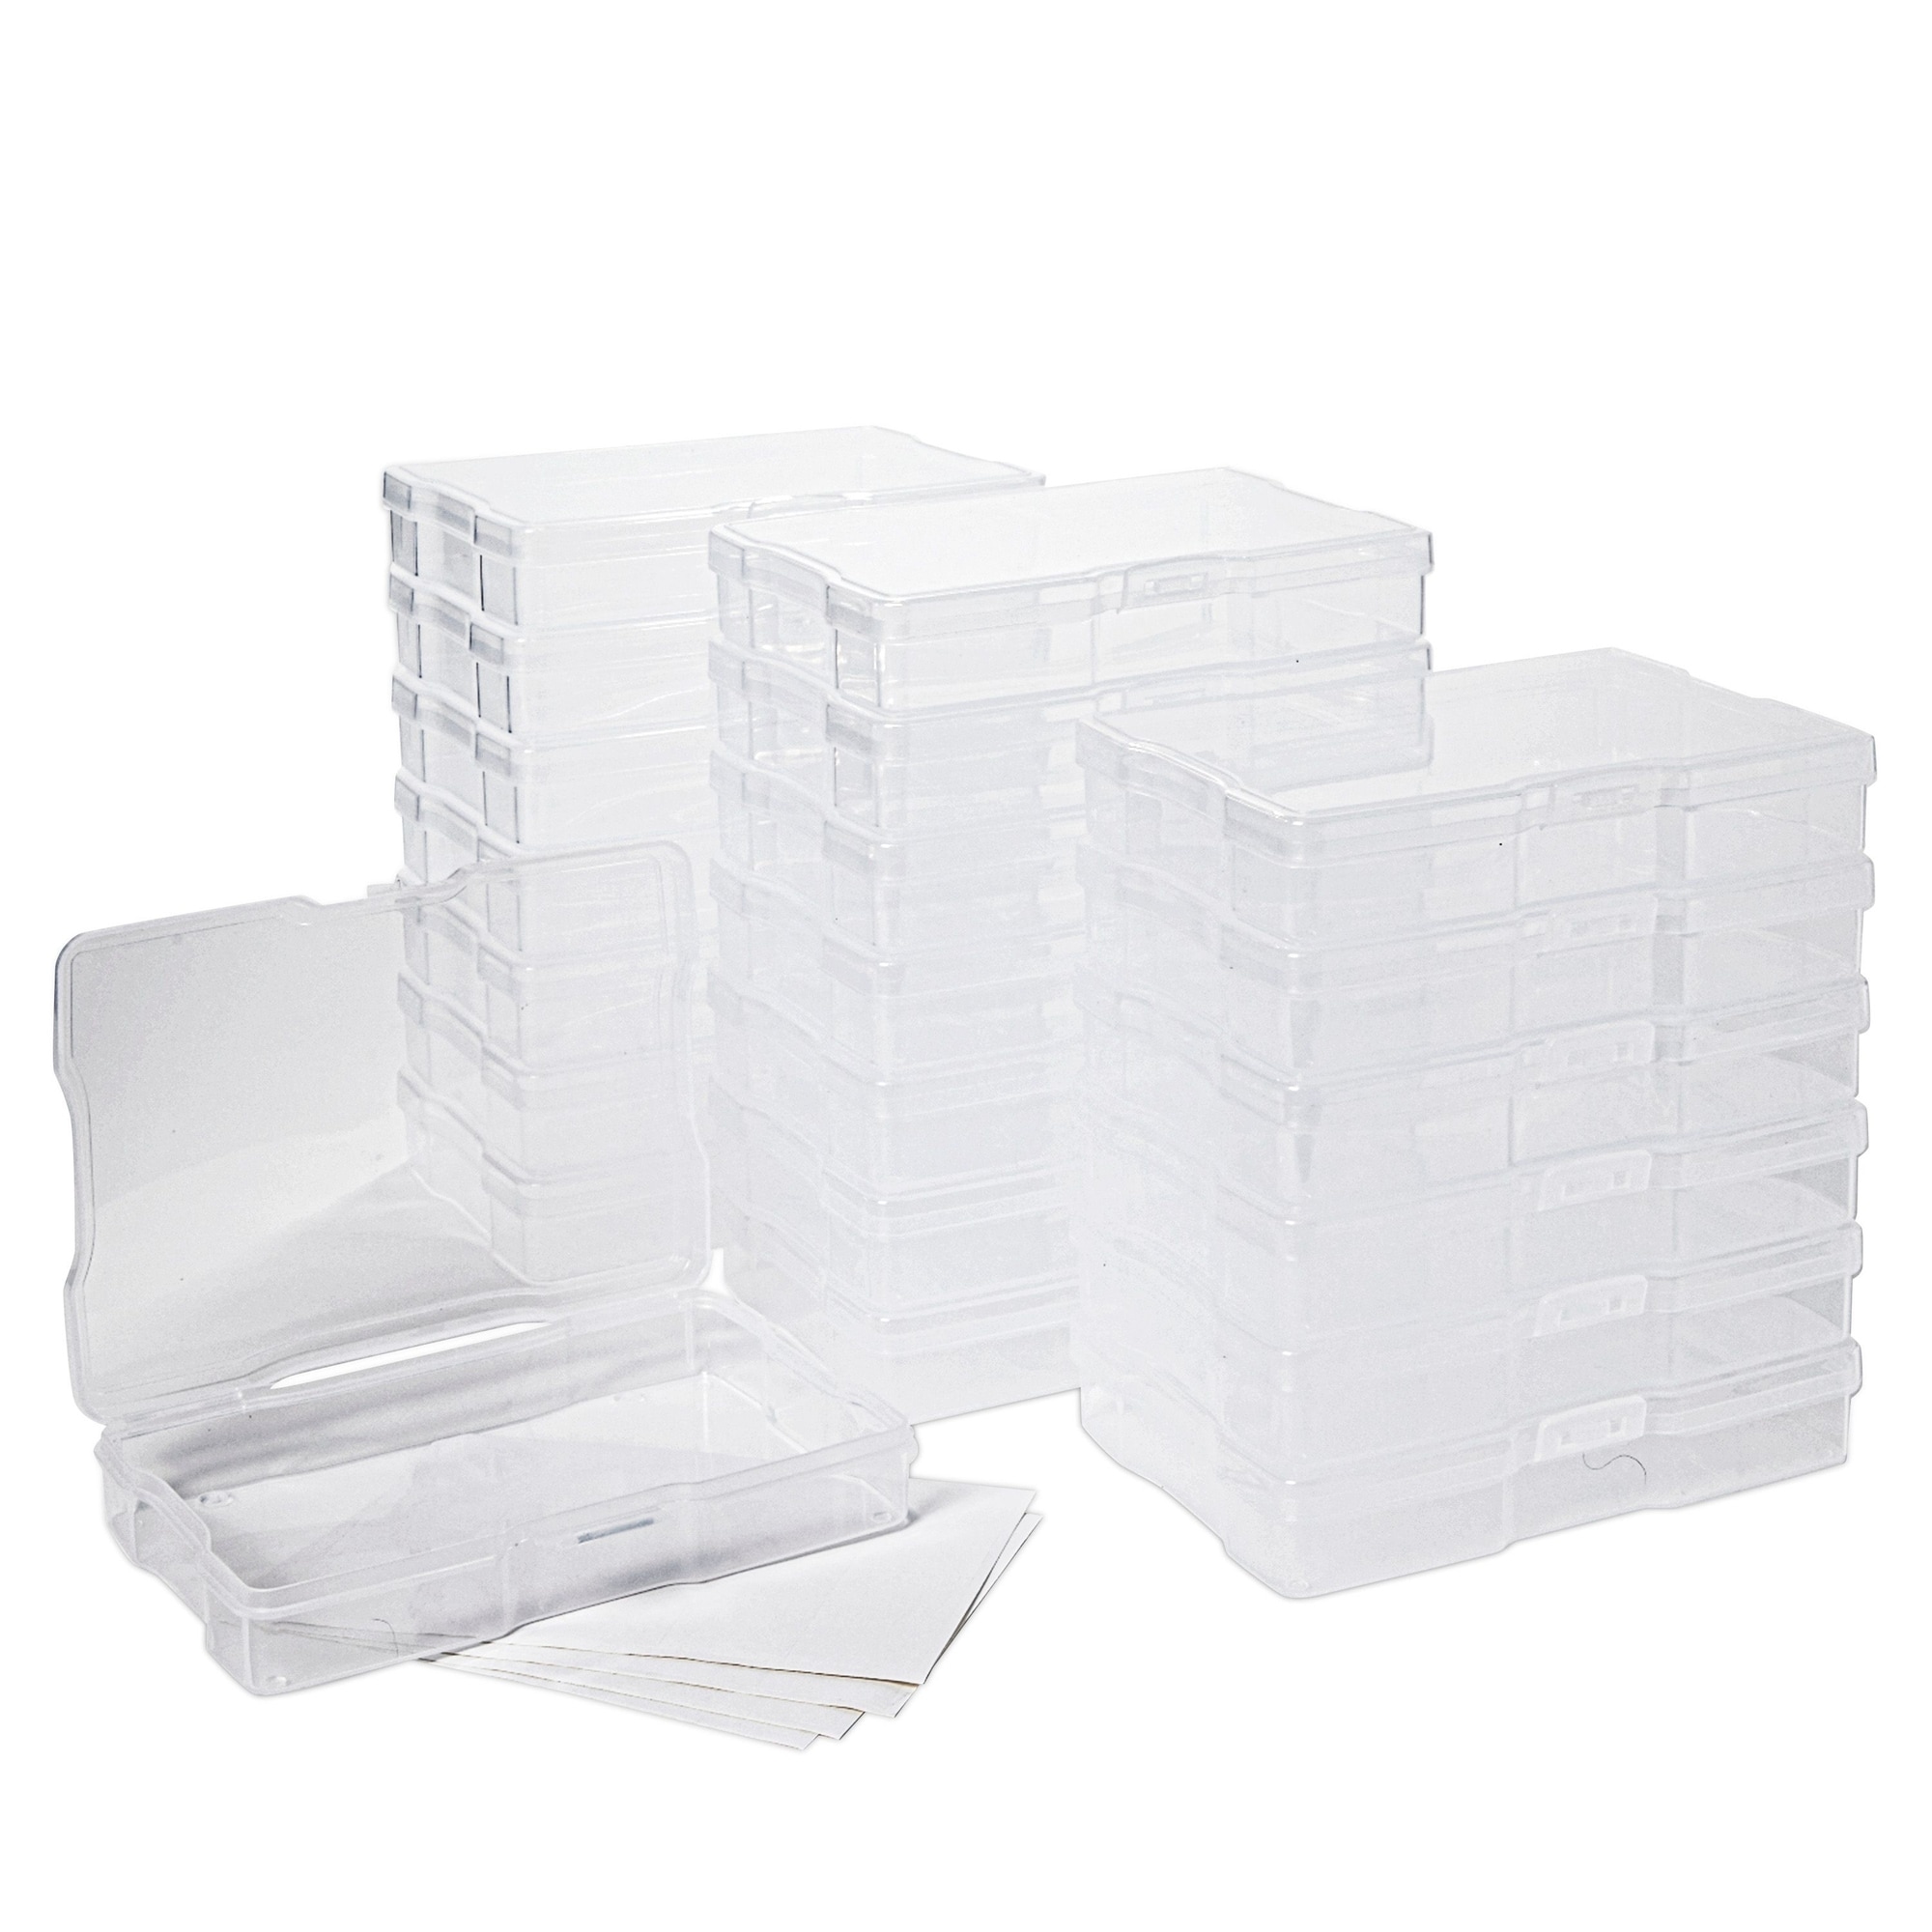 https://ak1.ostkcdn.com/images/products/is/images/direct/68bcd3efd91efa9a2d718ca27767bb61b5c84656/24-Pcs-Photo-Storage-Boxes-for-4x6-Pictures-with-40-Blank-Labels%2C-Clear-Cases-%26-Containers.jpg